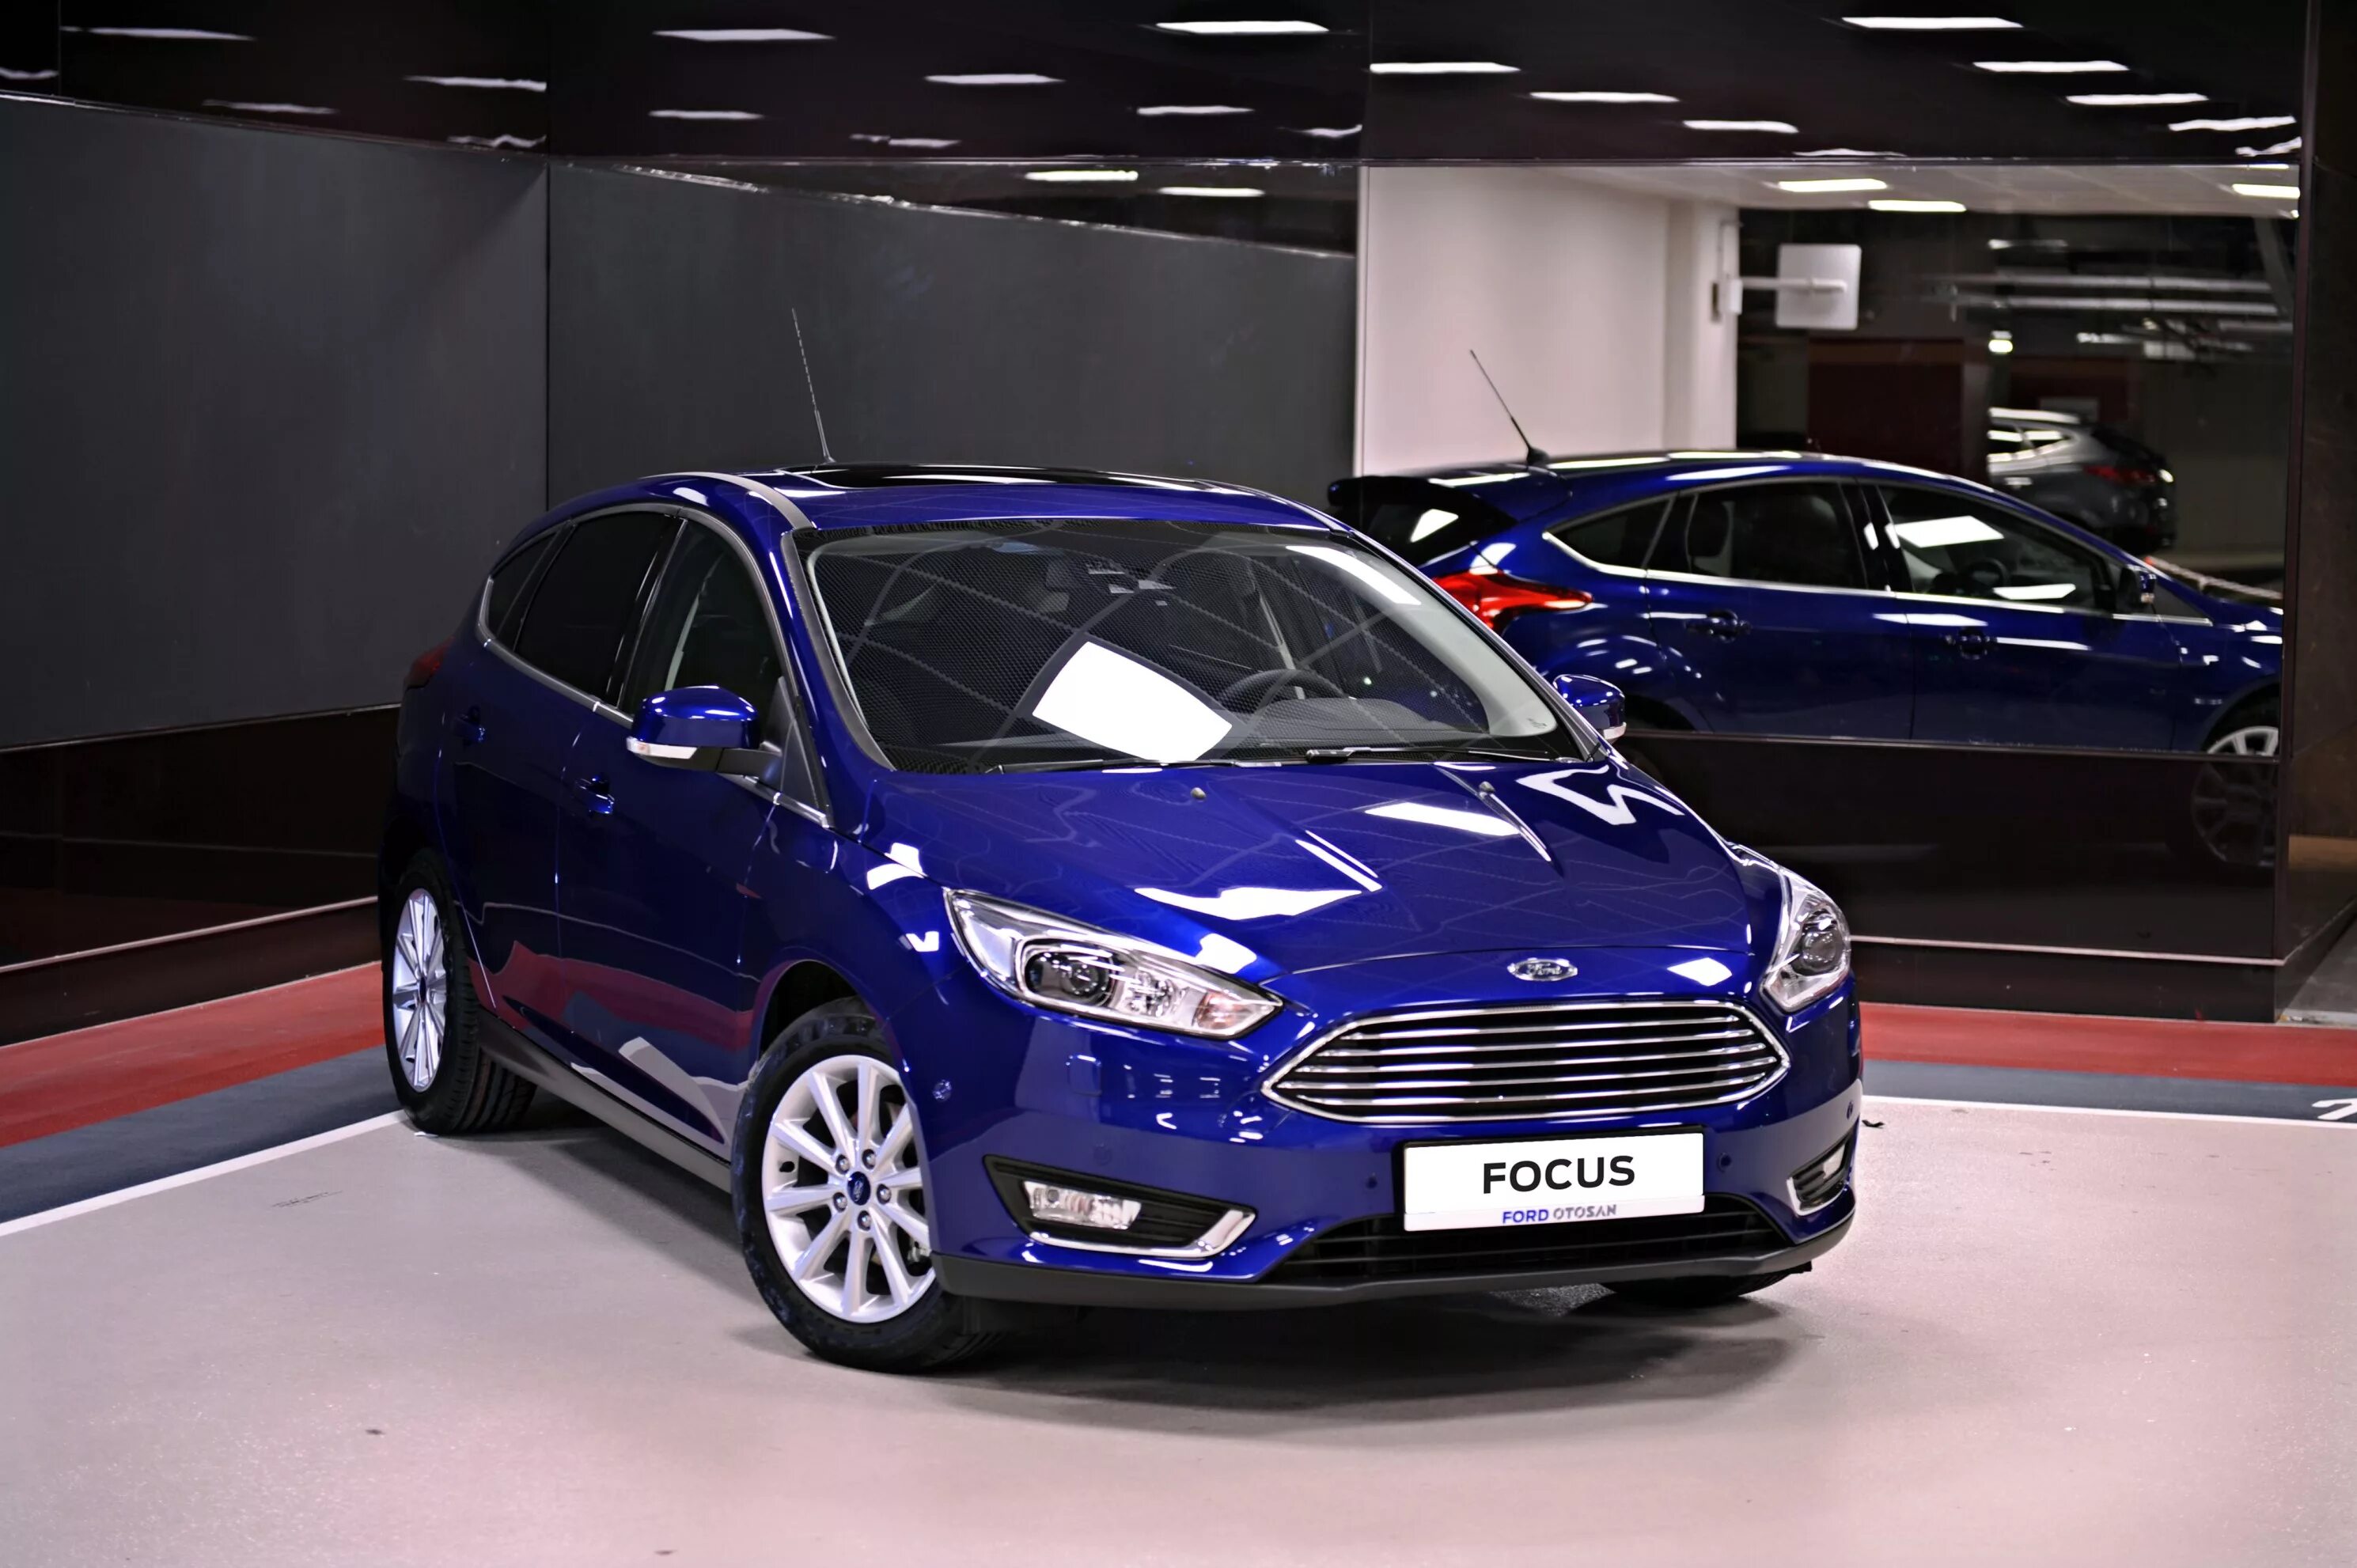 Ford Focus РФ. Форд фокус 17 года. Ford Focus 2012-2018.